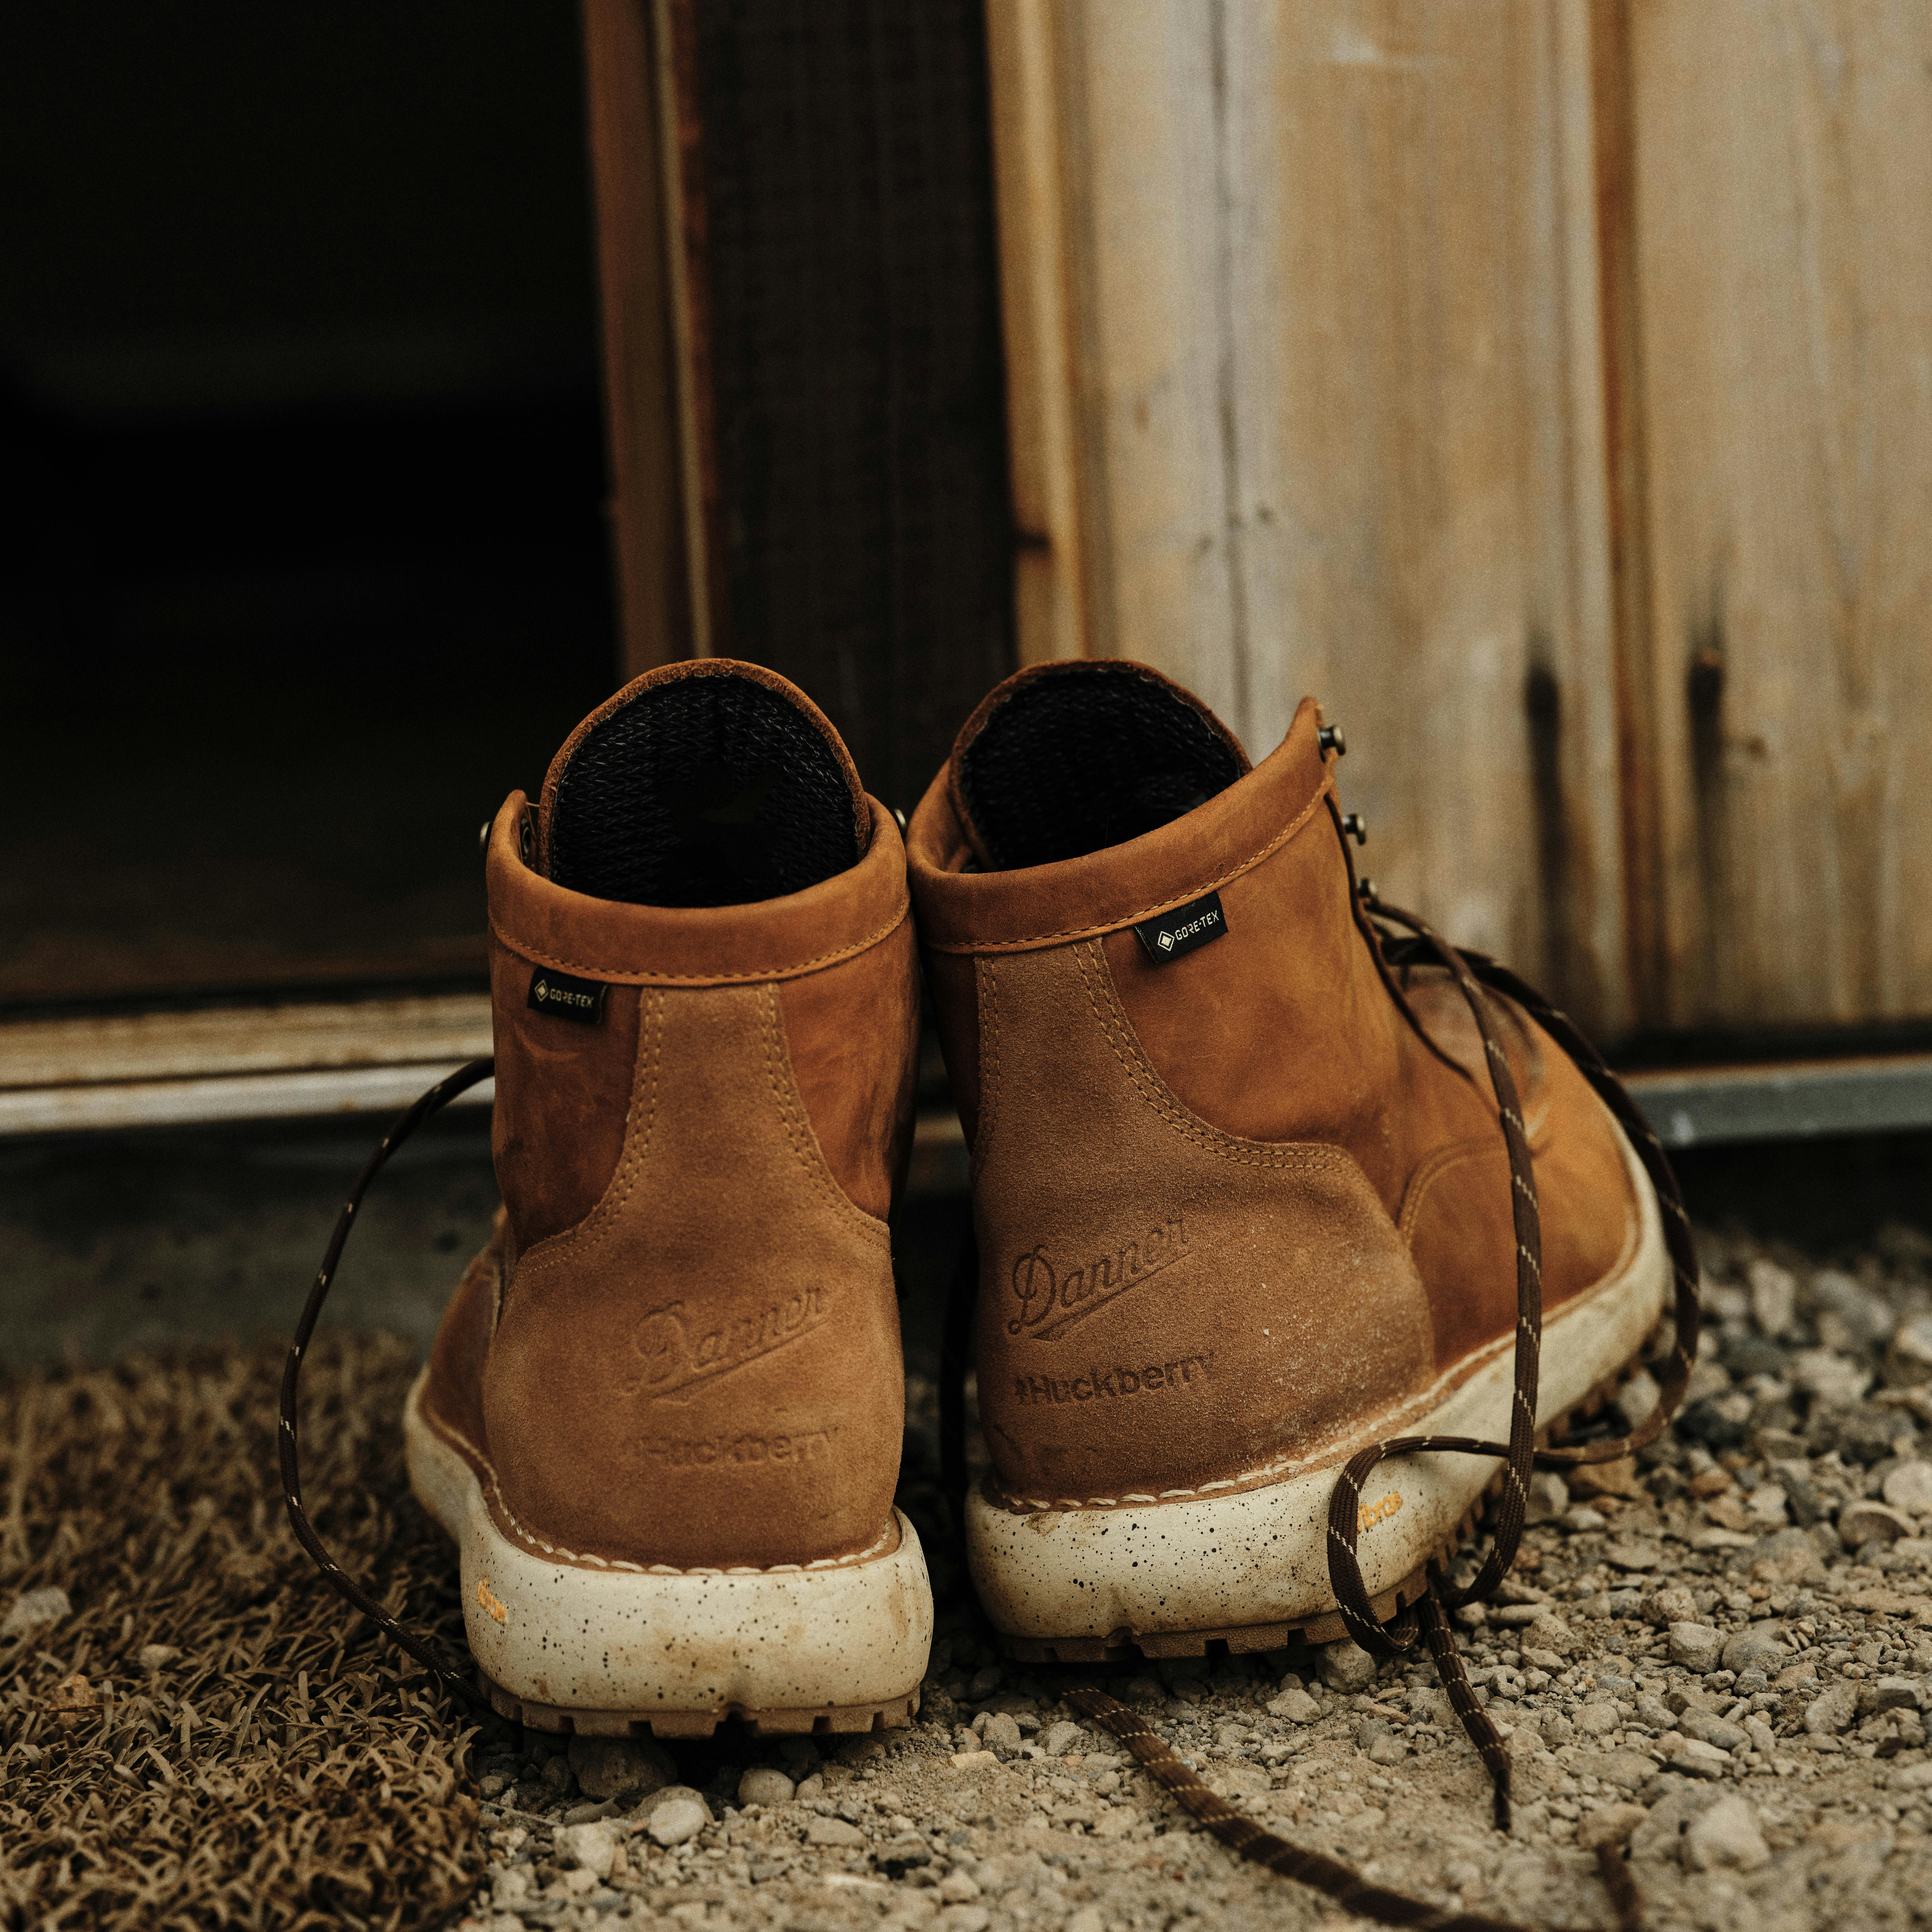 playground Appeal to be attractive Cardinal Shop Danner Men's Boots | Huckberry